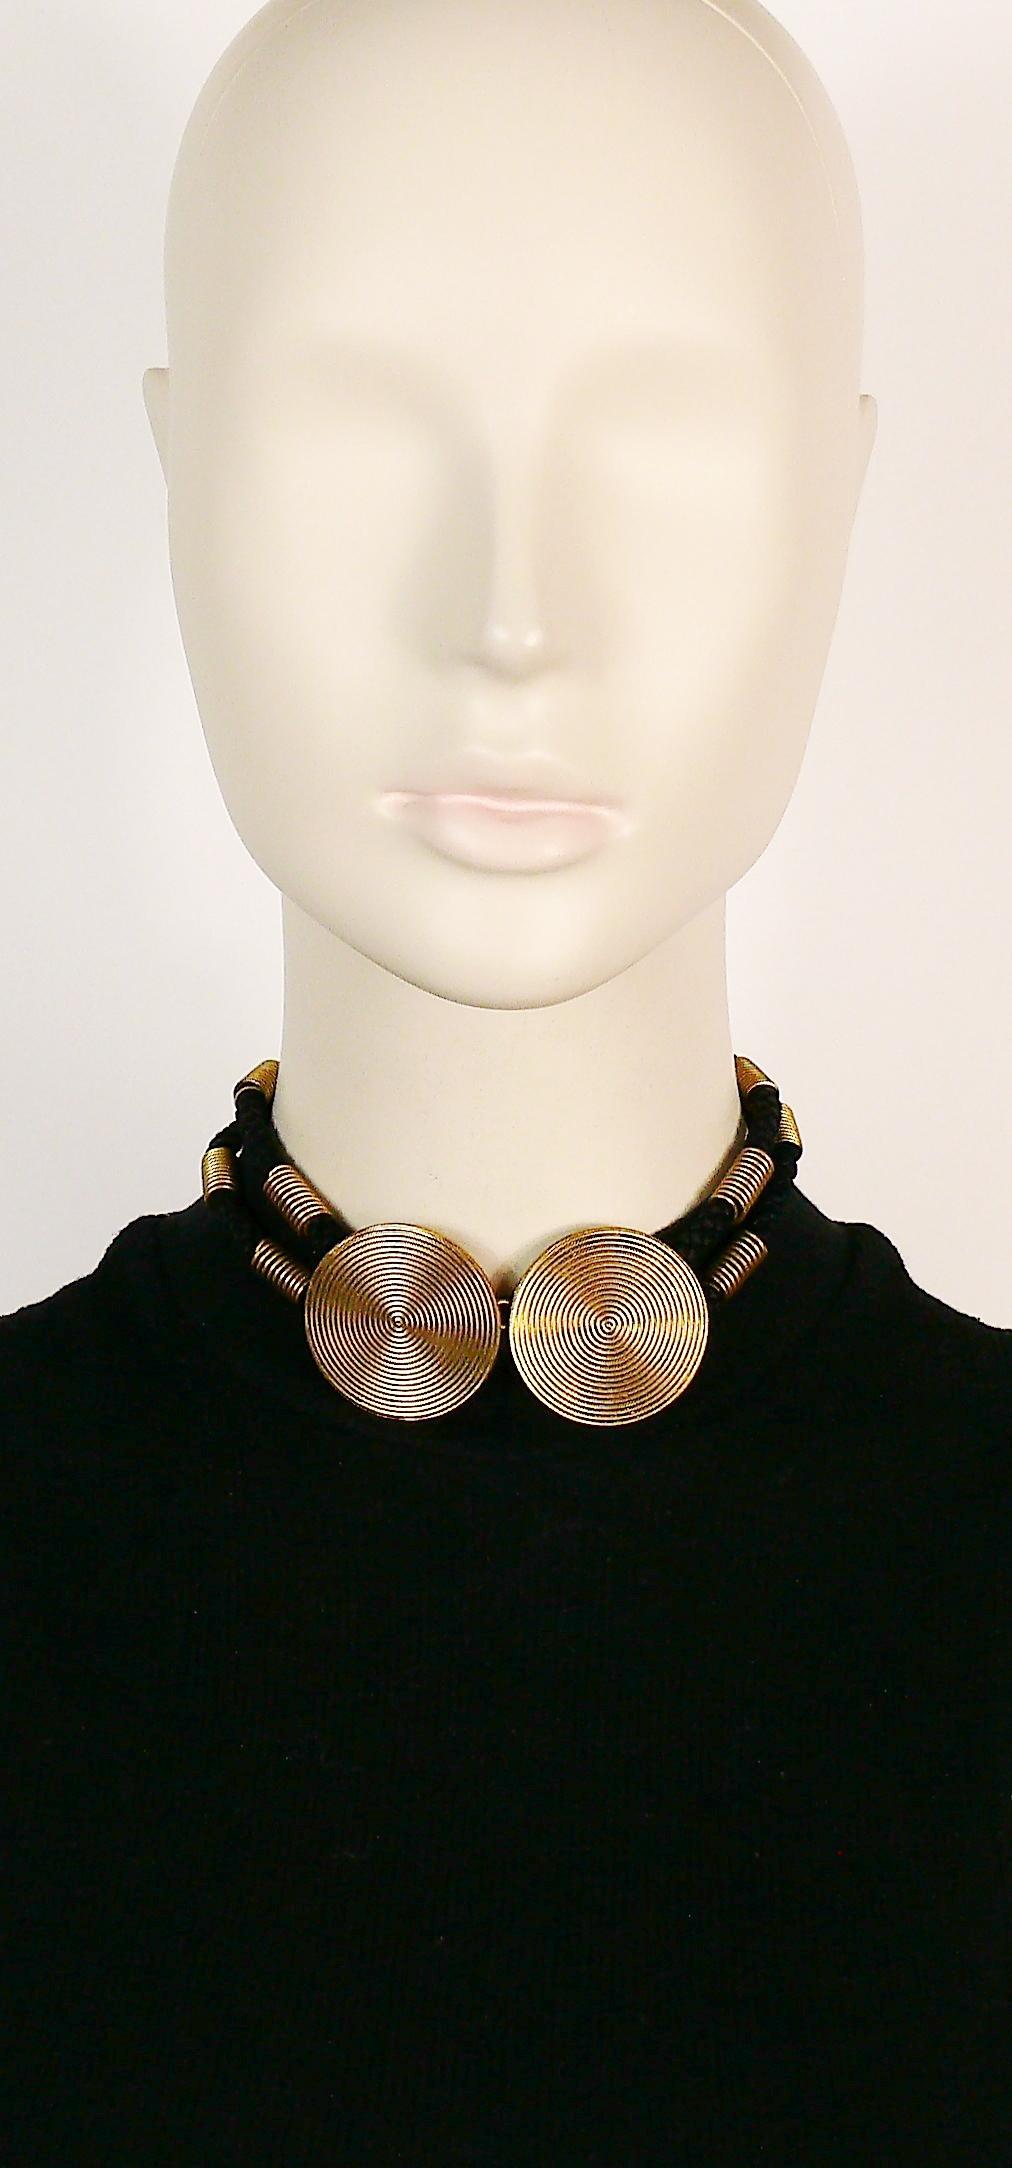 YVES SAINT LAURENT vintage choker necklace featuring two concentric antiqued gold toned discs and two black cords embellished with spring design elements.

Hook clasp closure.

Embossed YSL.

Indicative measurements : length approx. 34 cm (13.39